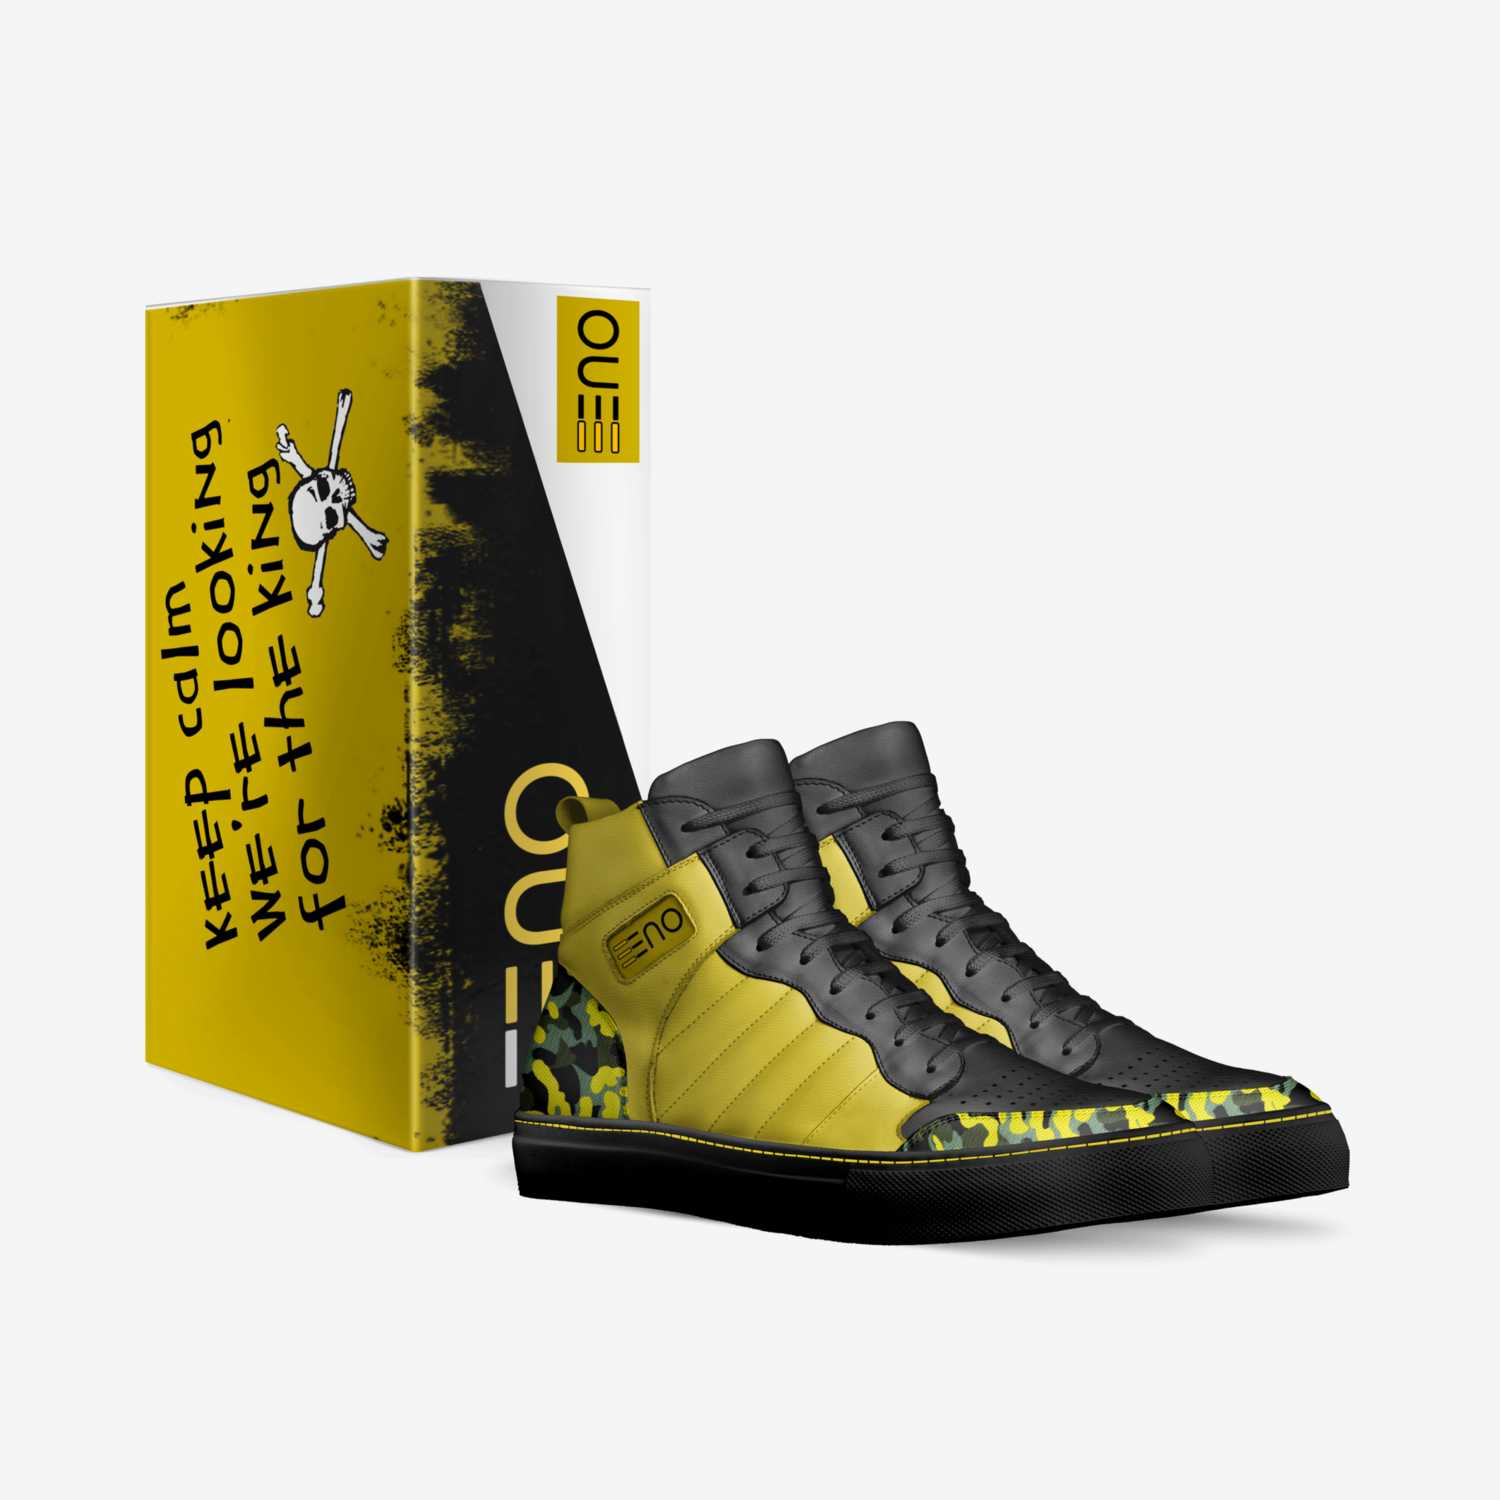 ENO  custom made in Italy shoes by Redstar Mafia | Box view